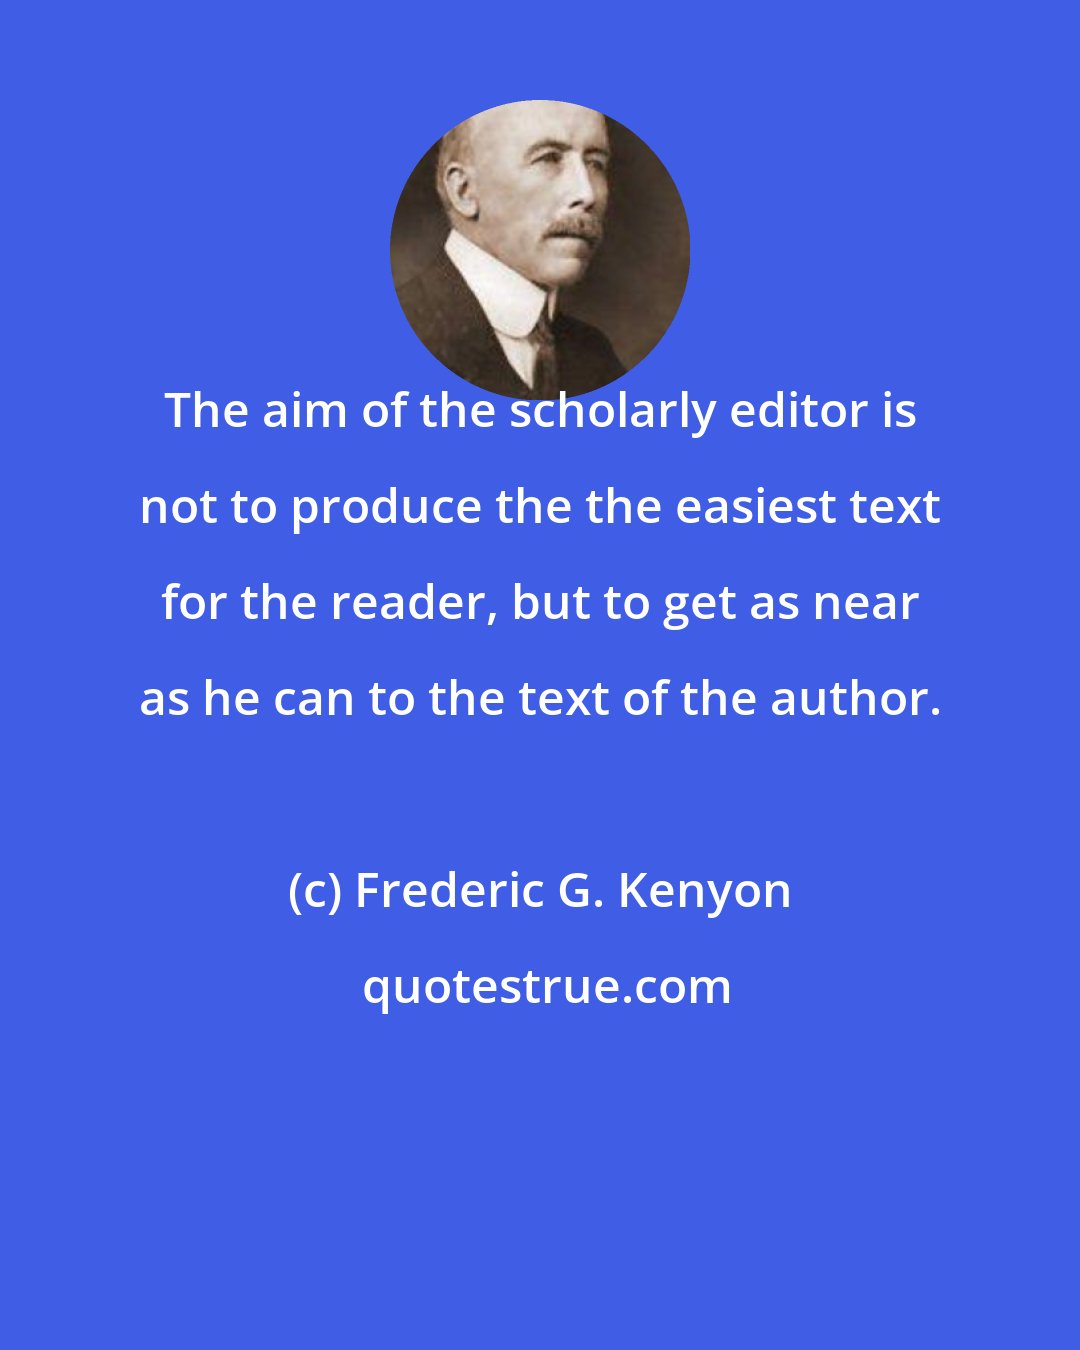 Frederic G. Kenyon: The aim of the scholarly editor is not to produce the the easiest text for the reader, but to get as near as he can to the text of the author.